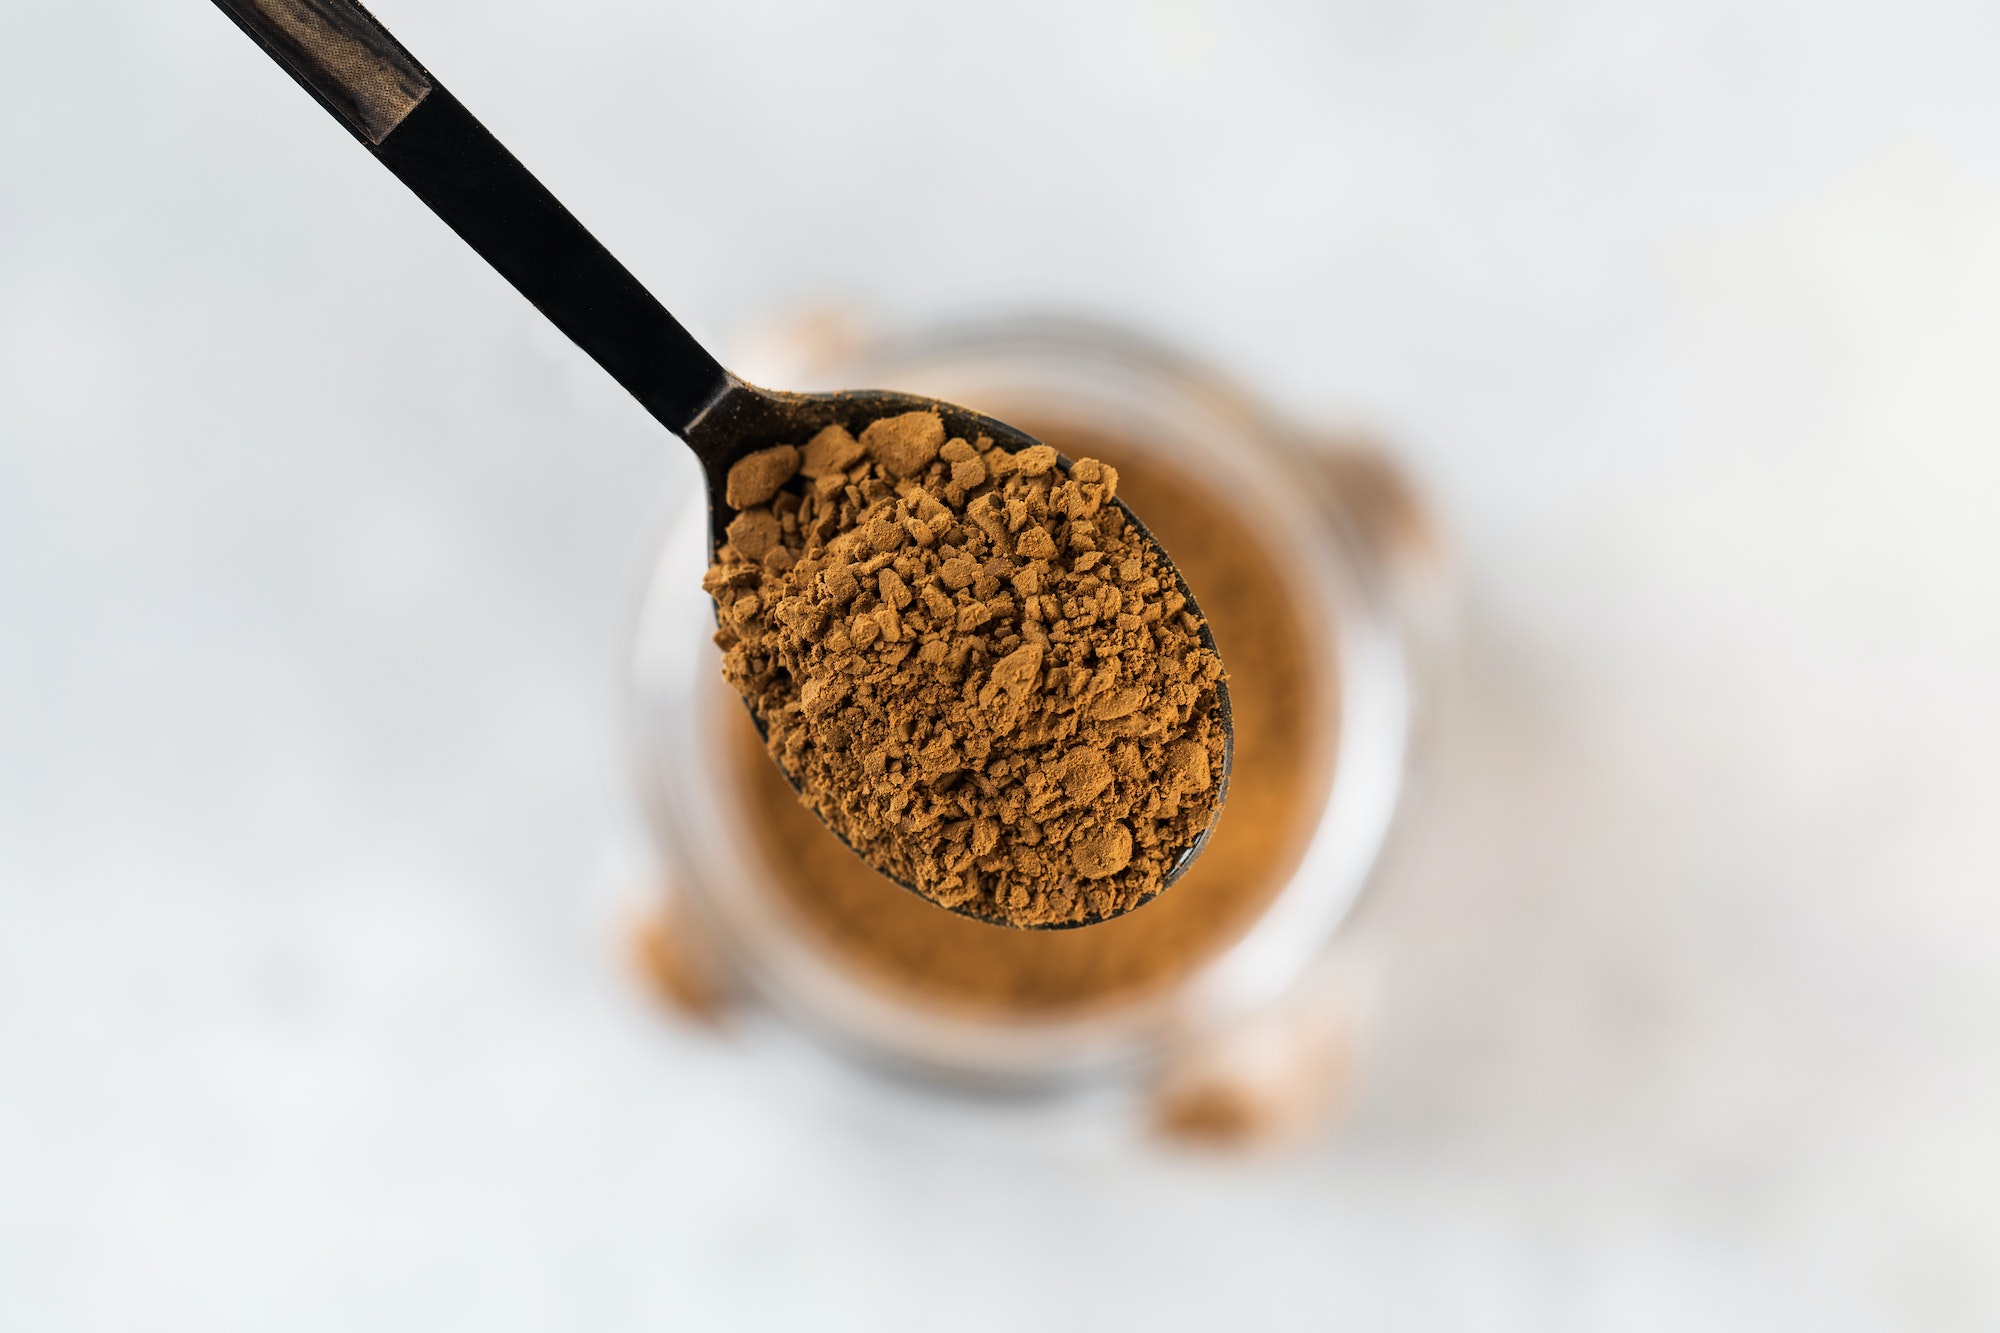 A small spoon with instant coffee granules over a glass jar of coffee.